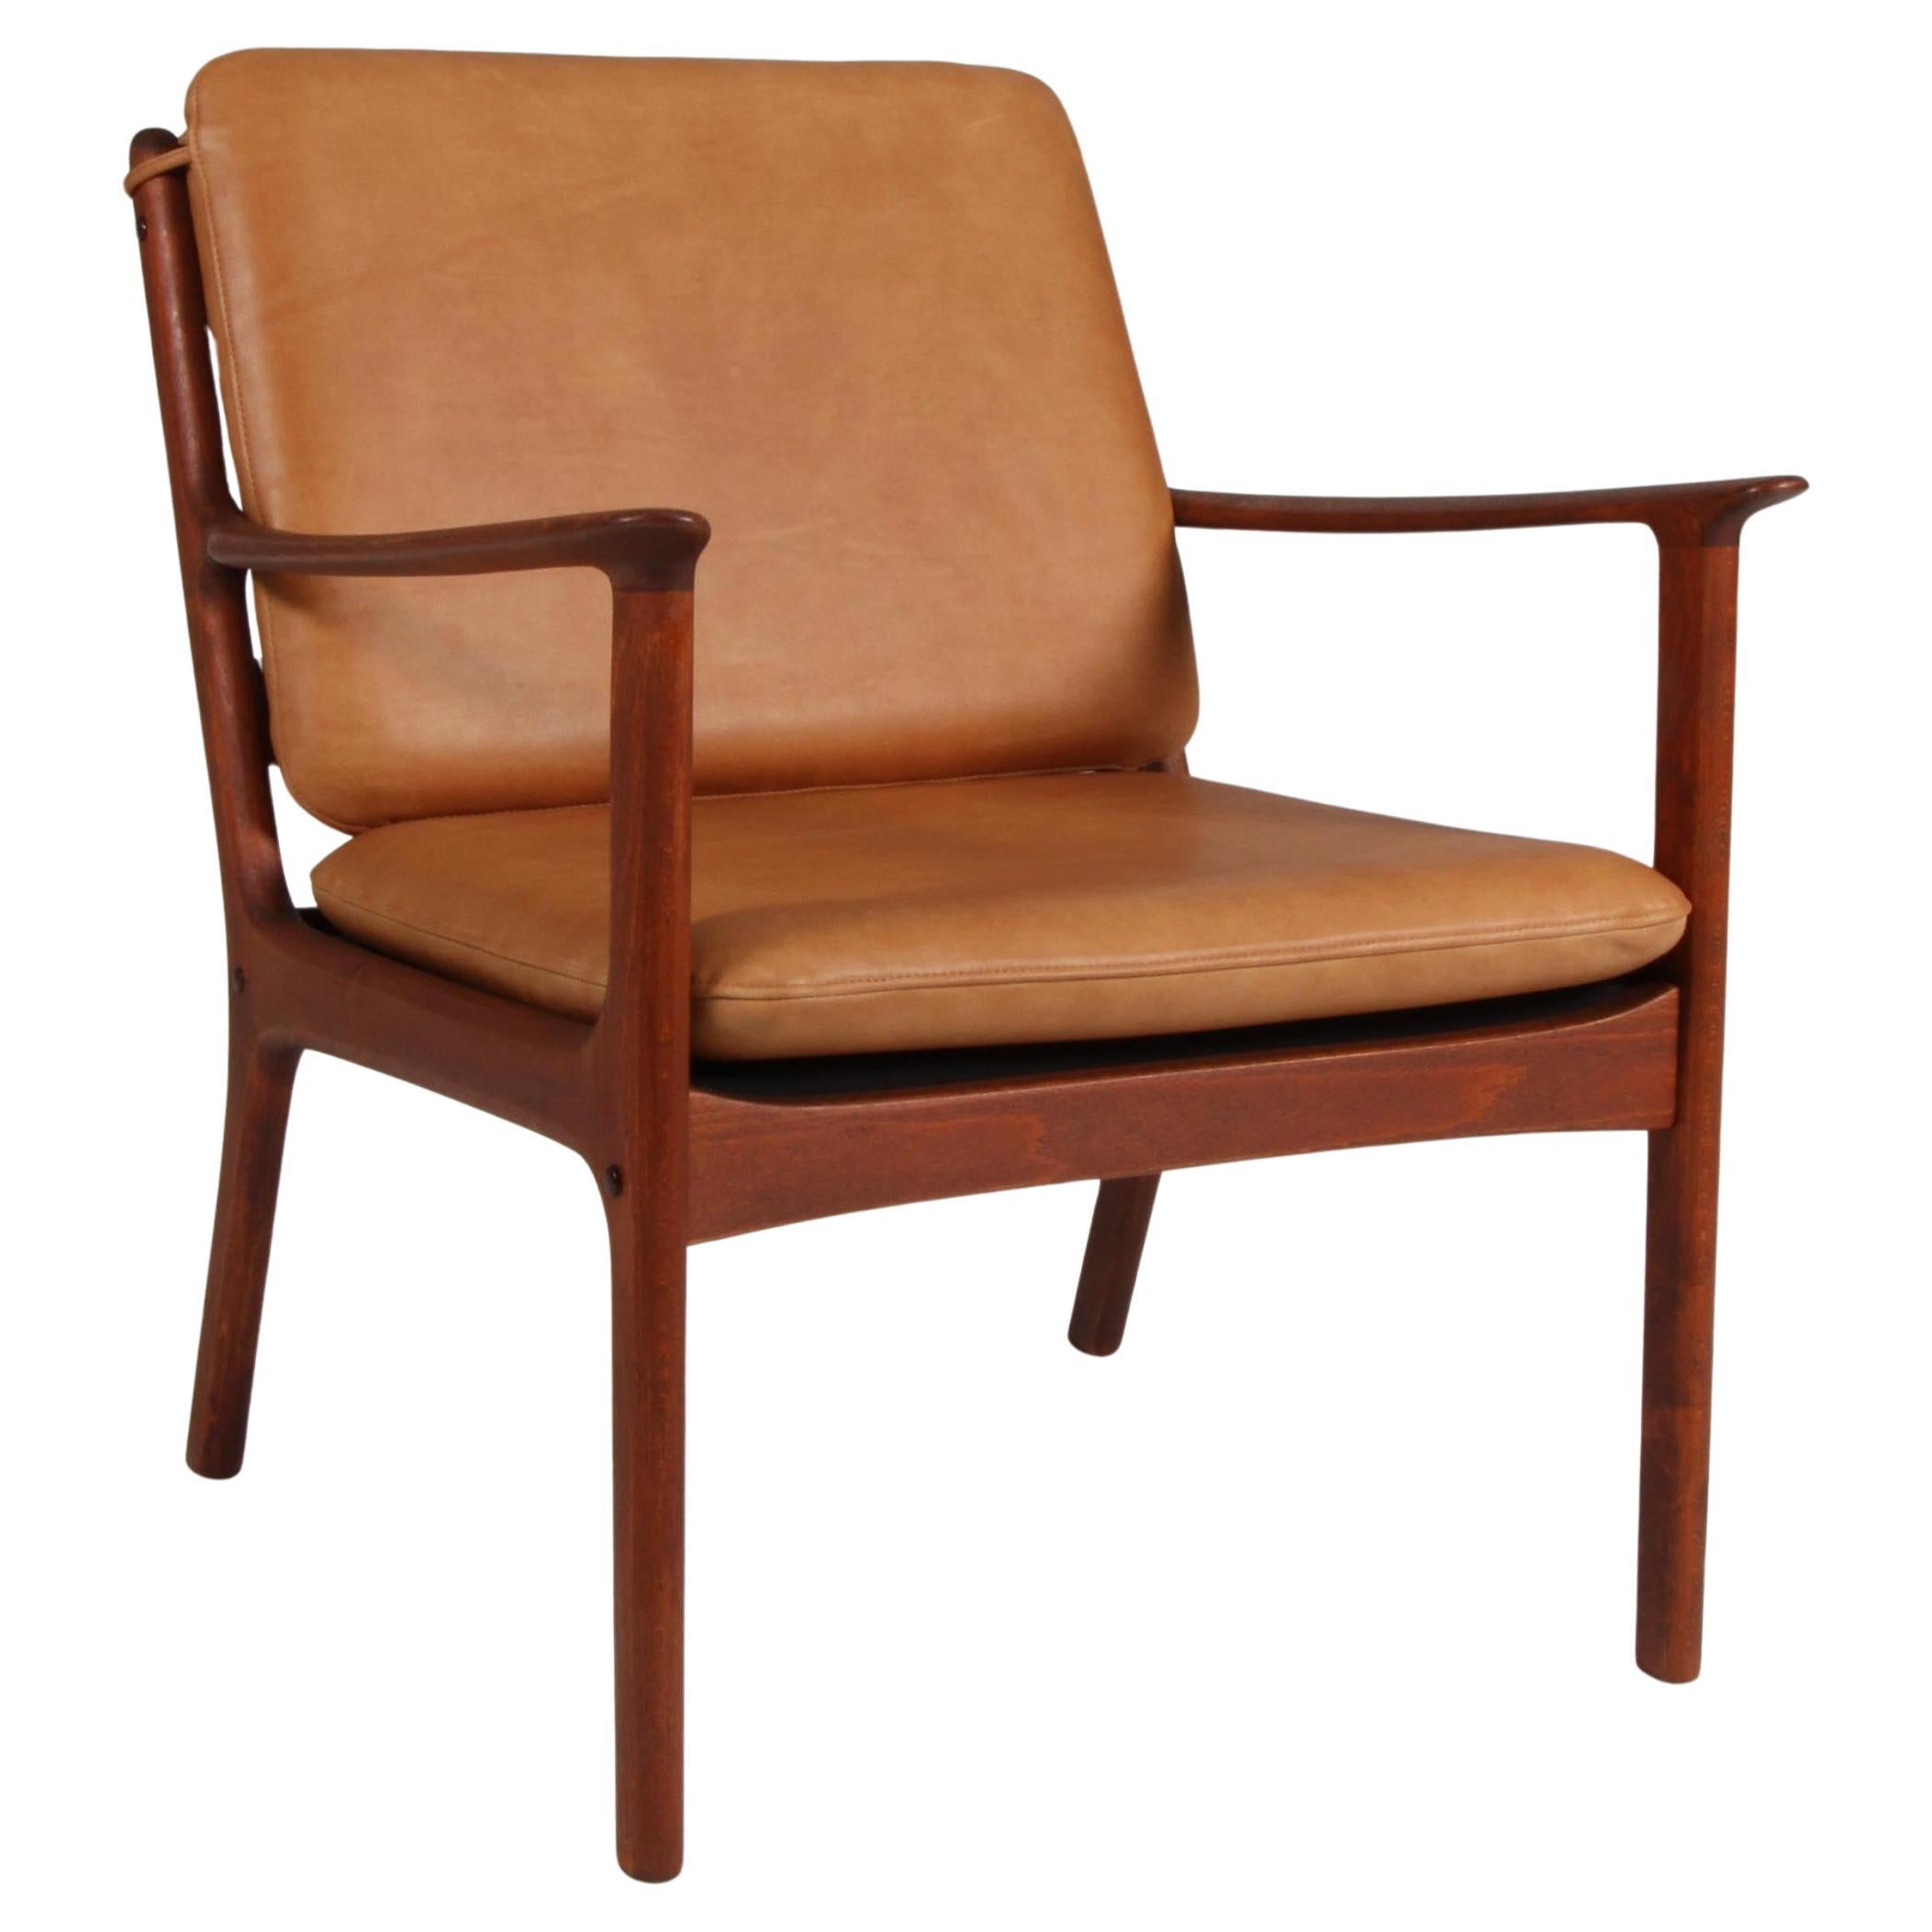 Ole Wanscher Lounge Chairs, Model PJ112, Cognac Aniline Leather, stained beech